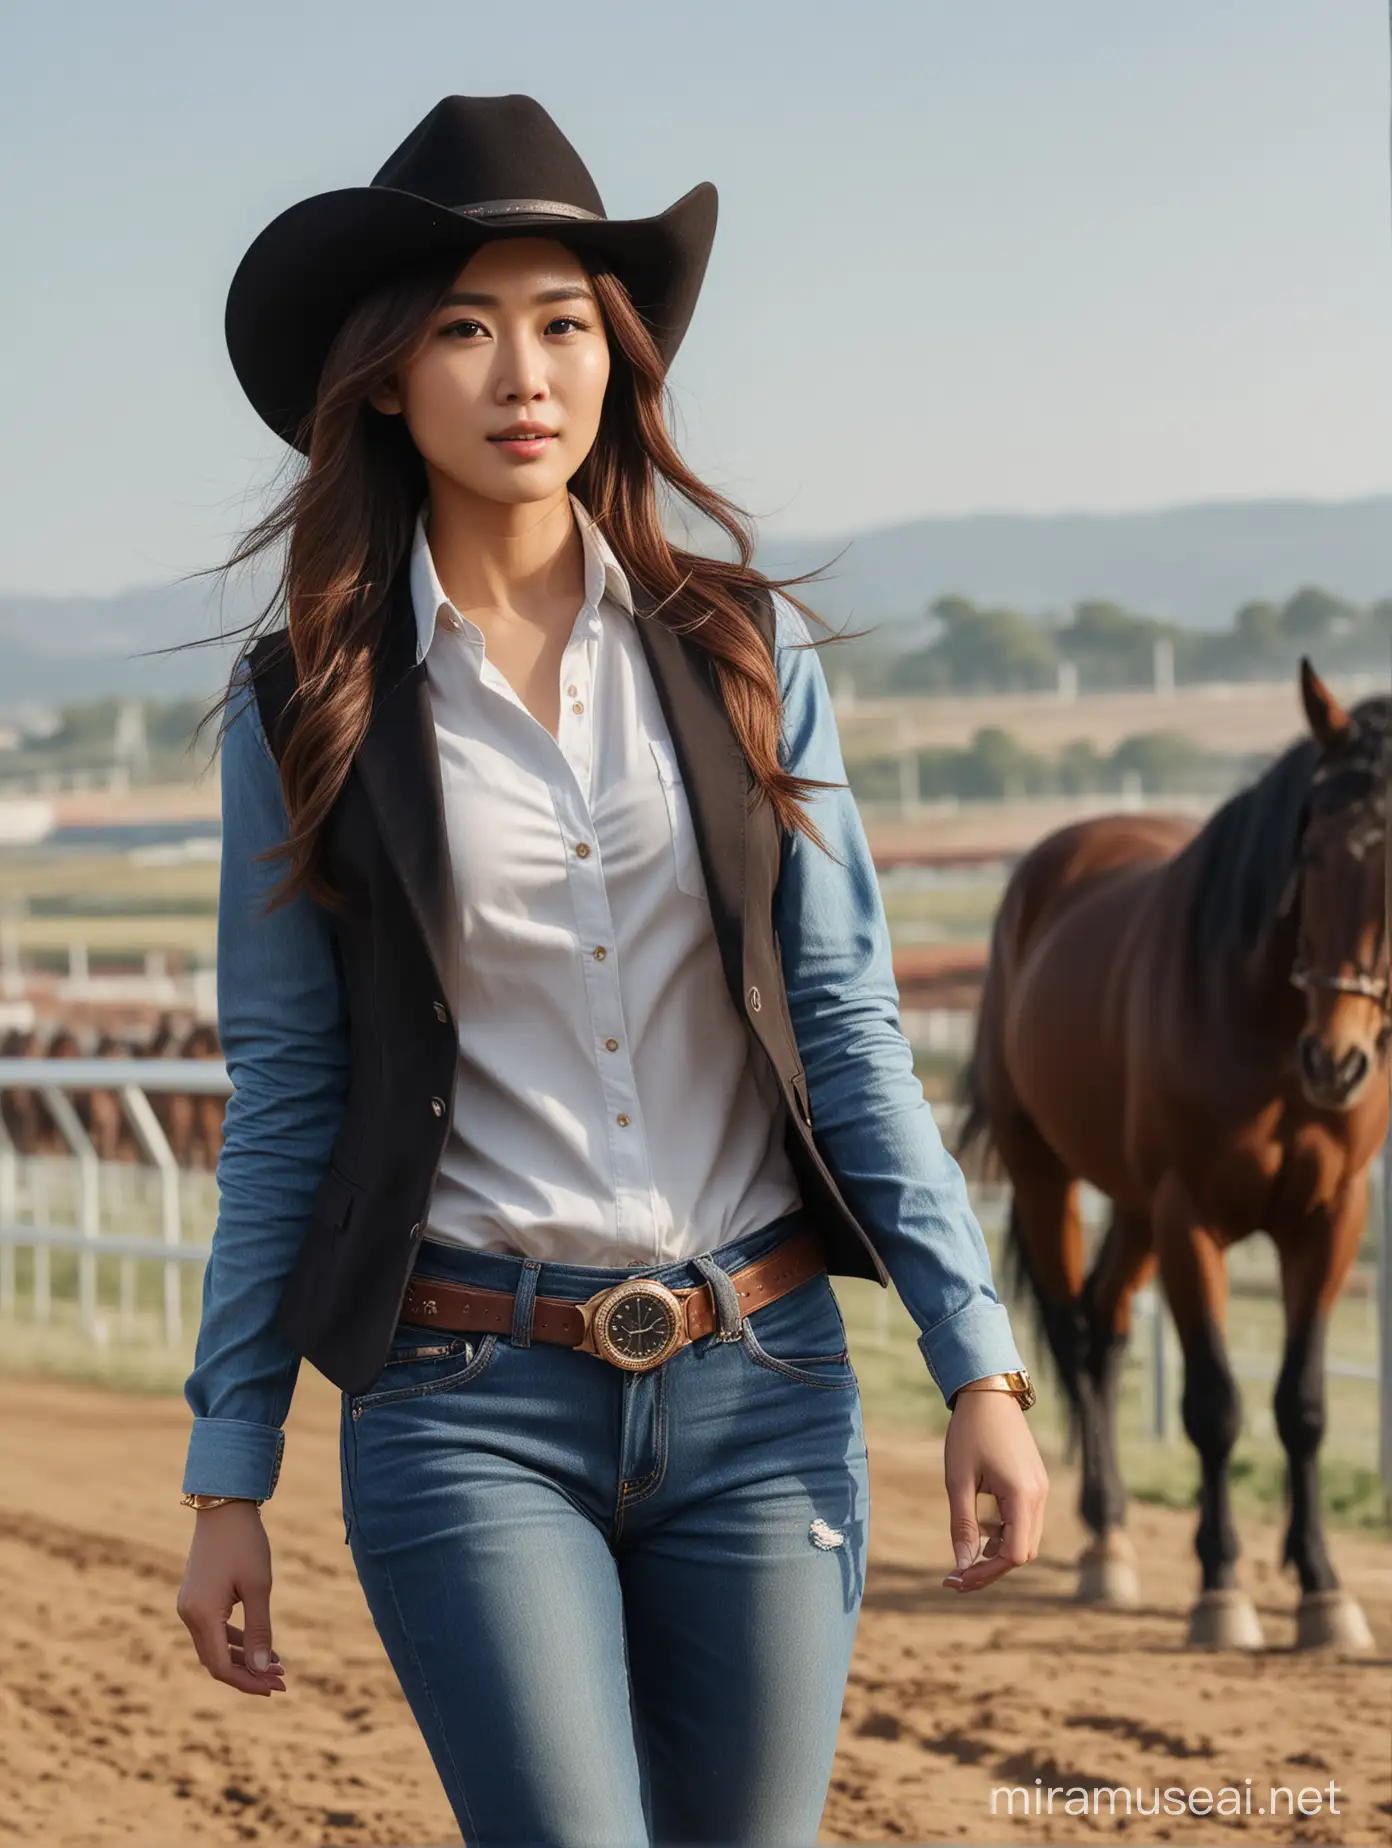 Asian Woman in Cowboy Attire Walking a Black Horse on a Racing Track